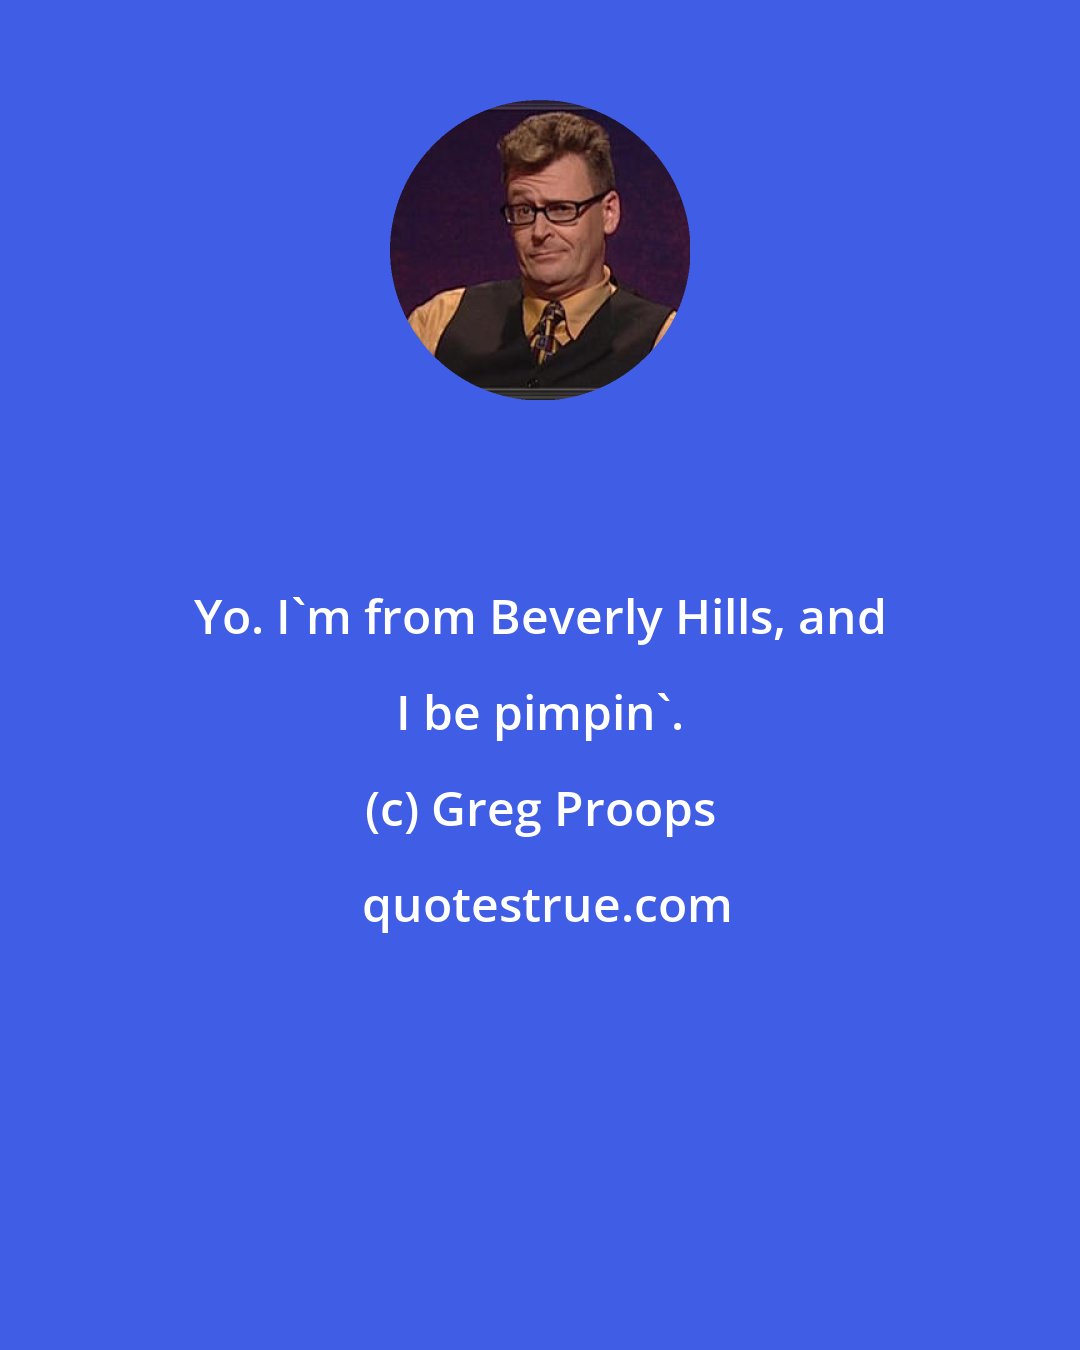 Greg Proops: Yo. I'm from Beverly Hills, and I be pimpin'.